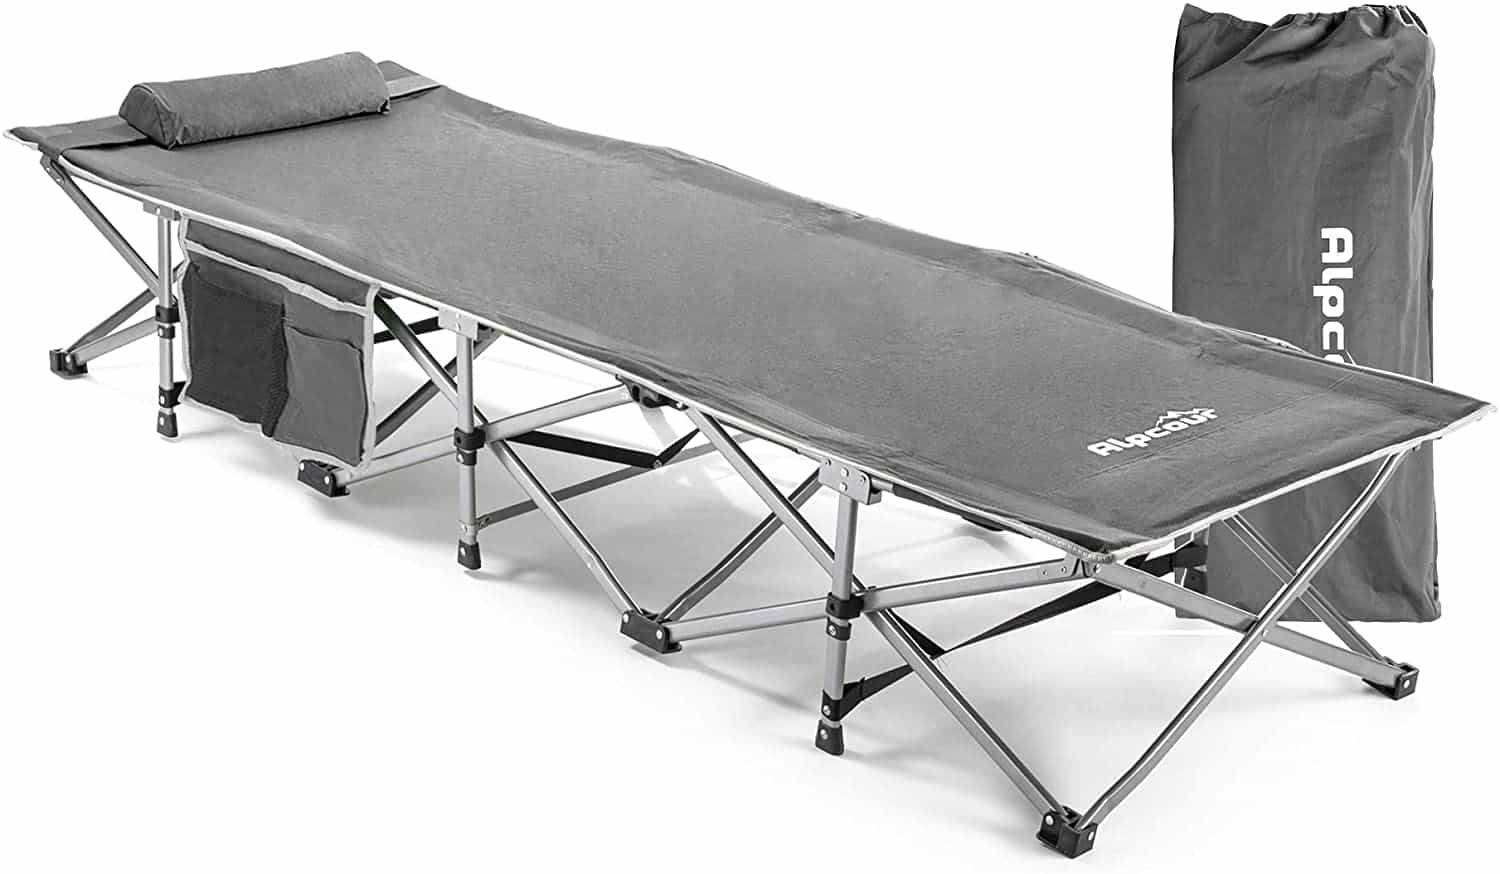 Best Camping Cot For Bad Back